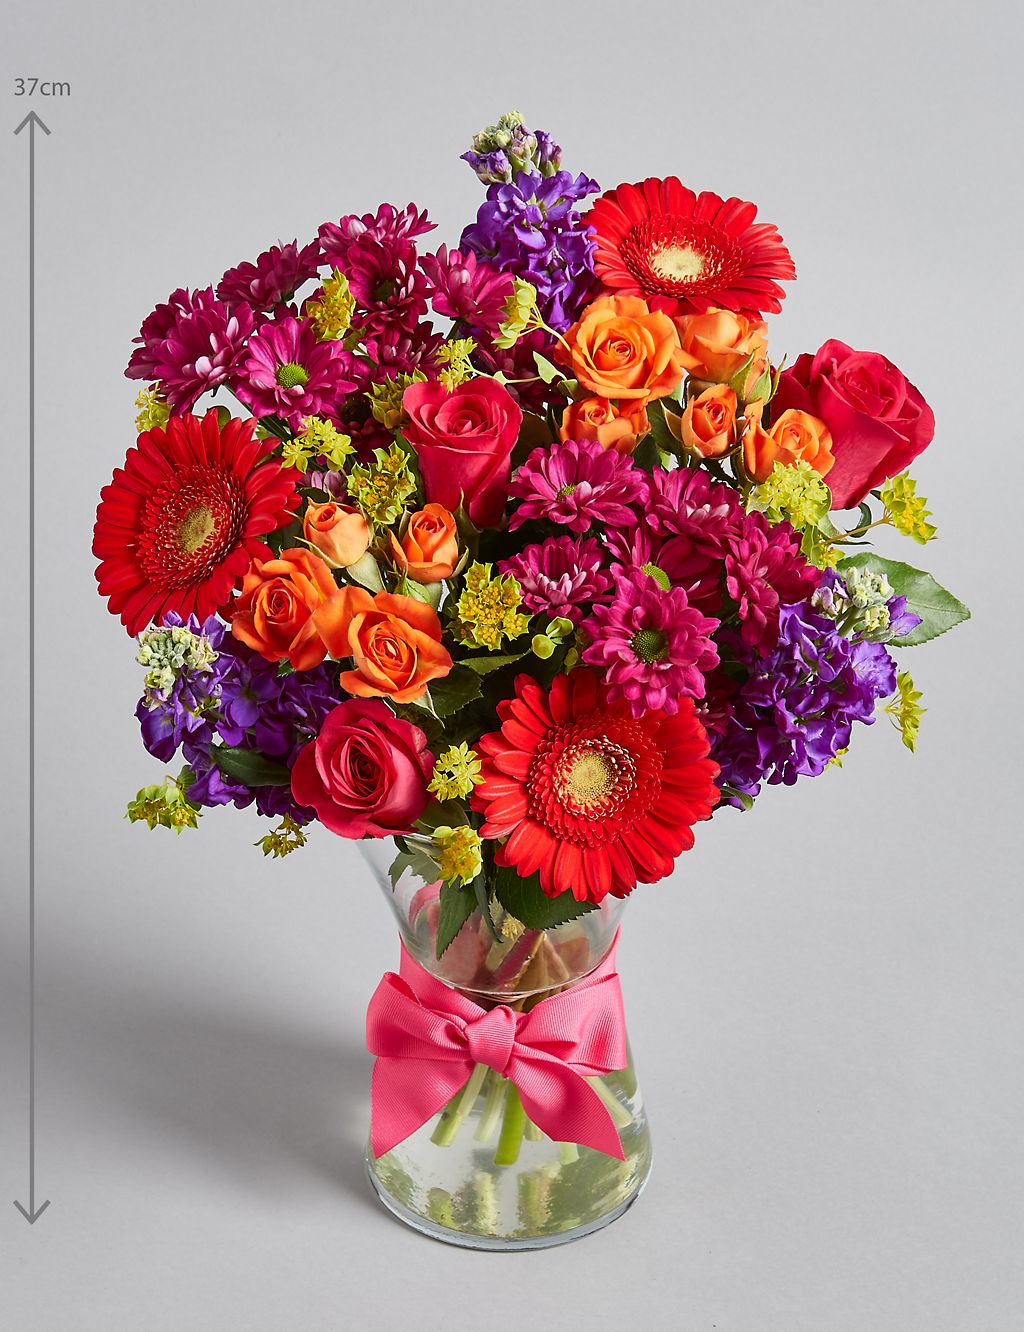 Summer Stocks & Rose Bouquet with Vase 2 of 5